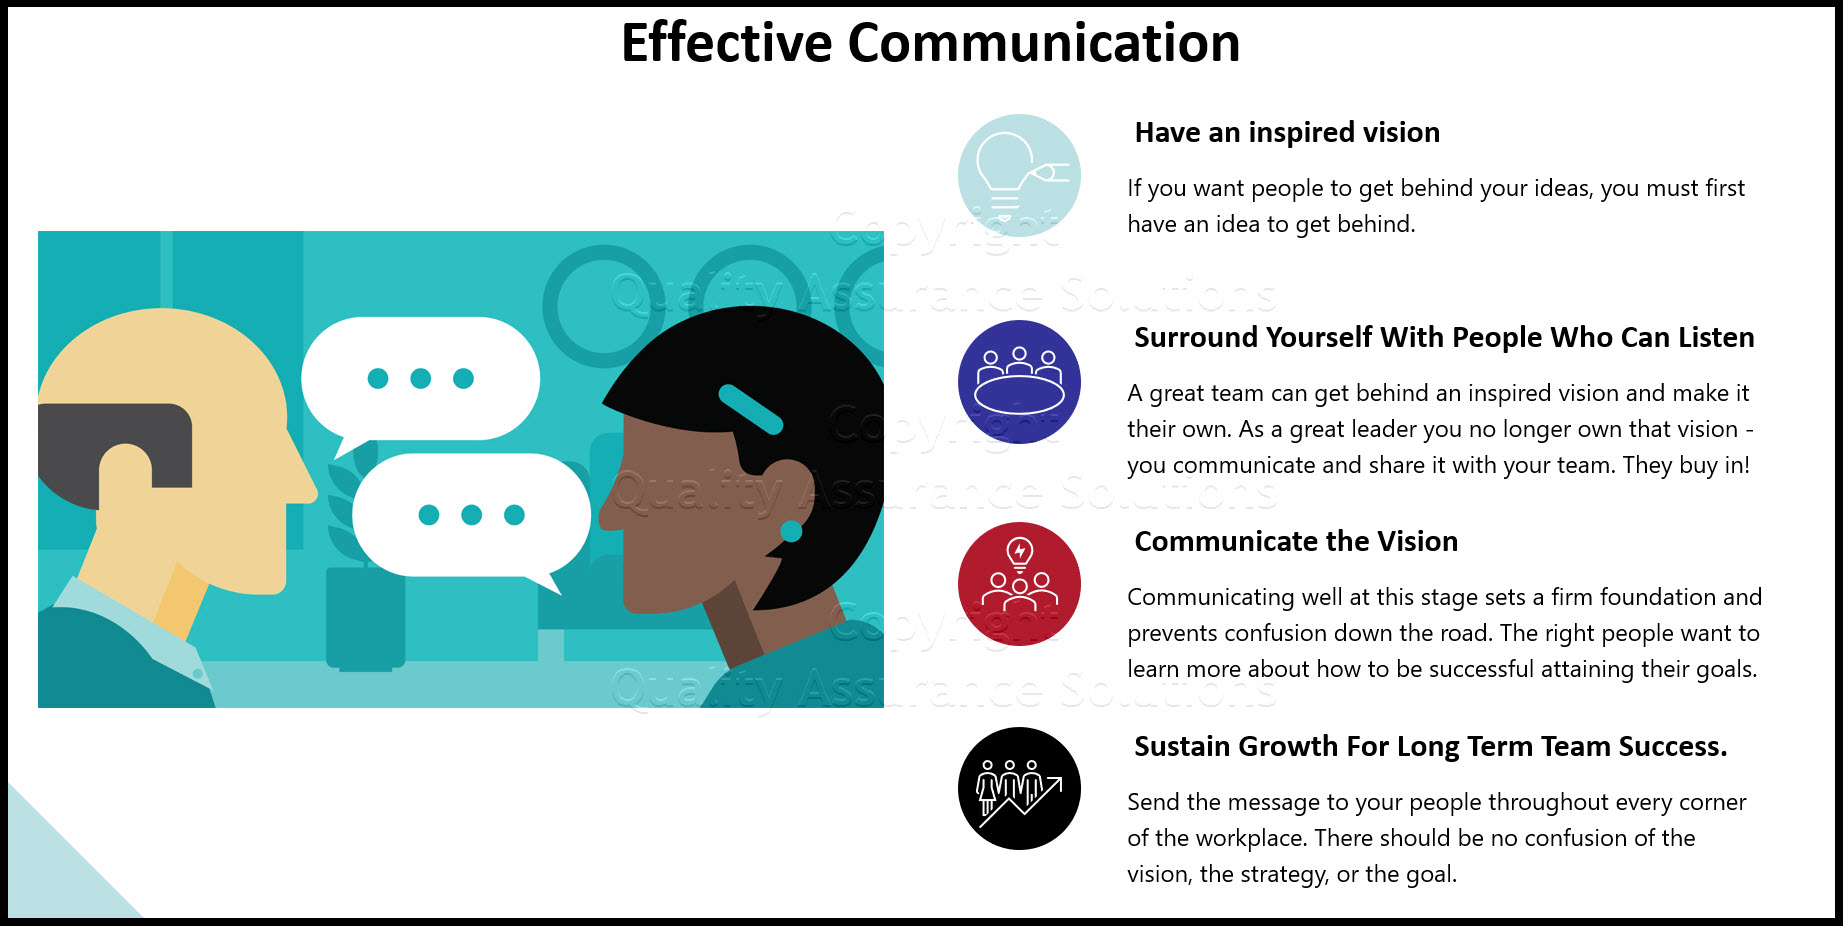 Learn the four steps to effective communication skills.